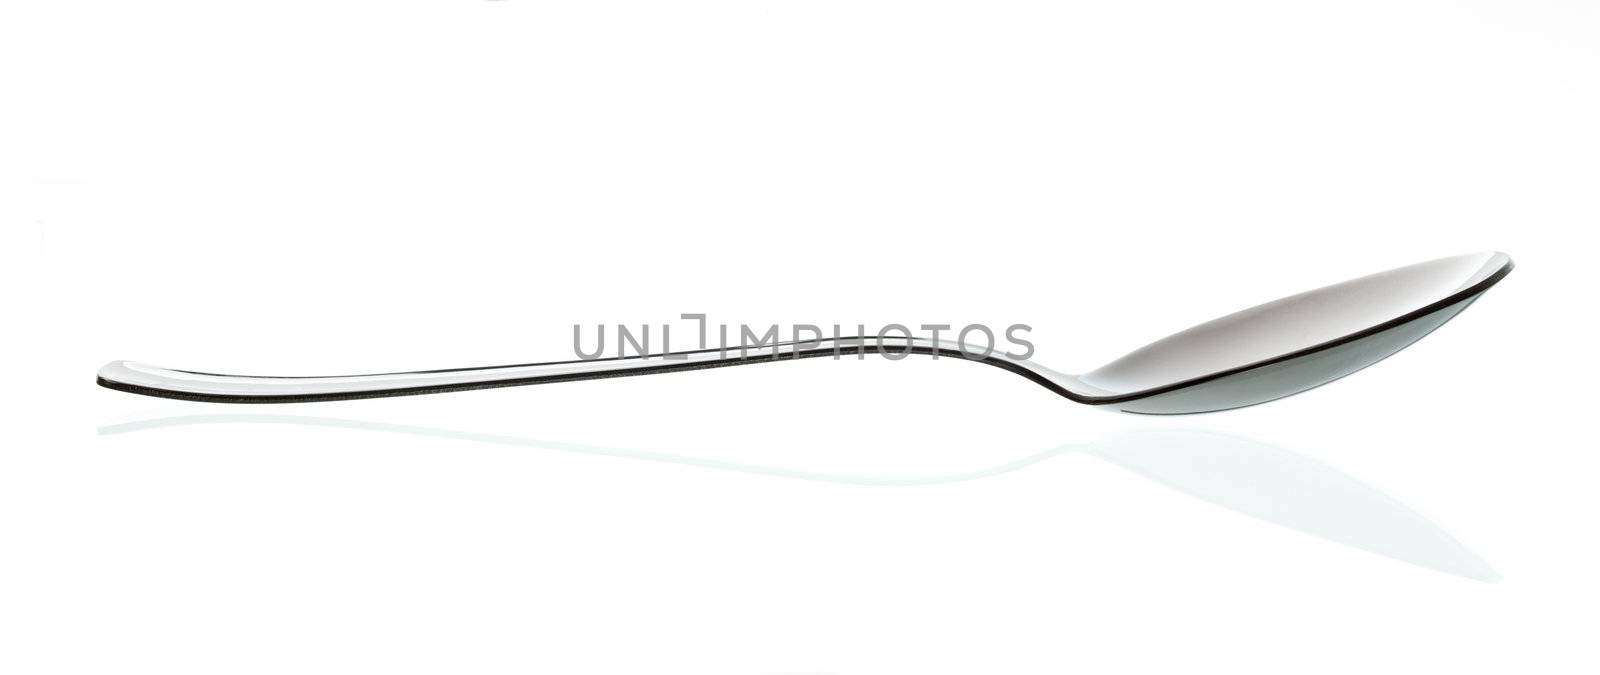 table spoon by agg